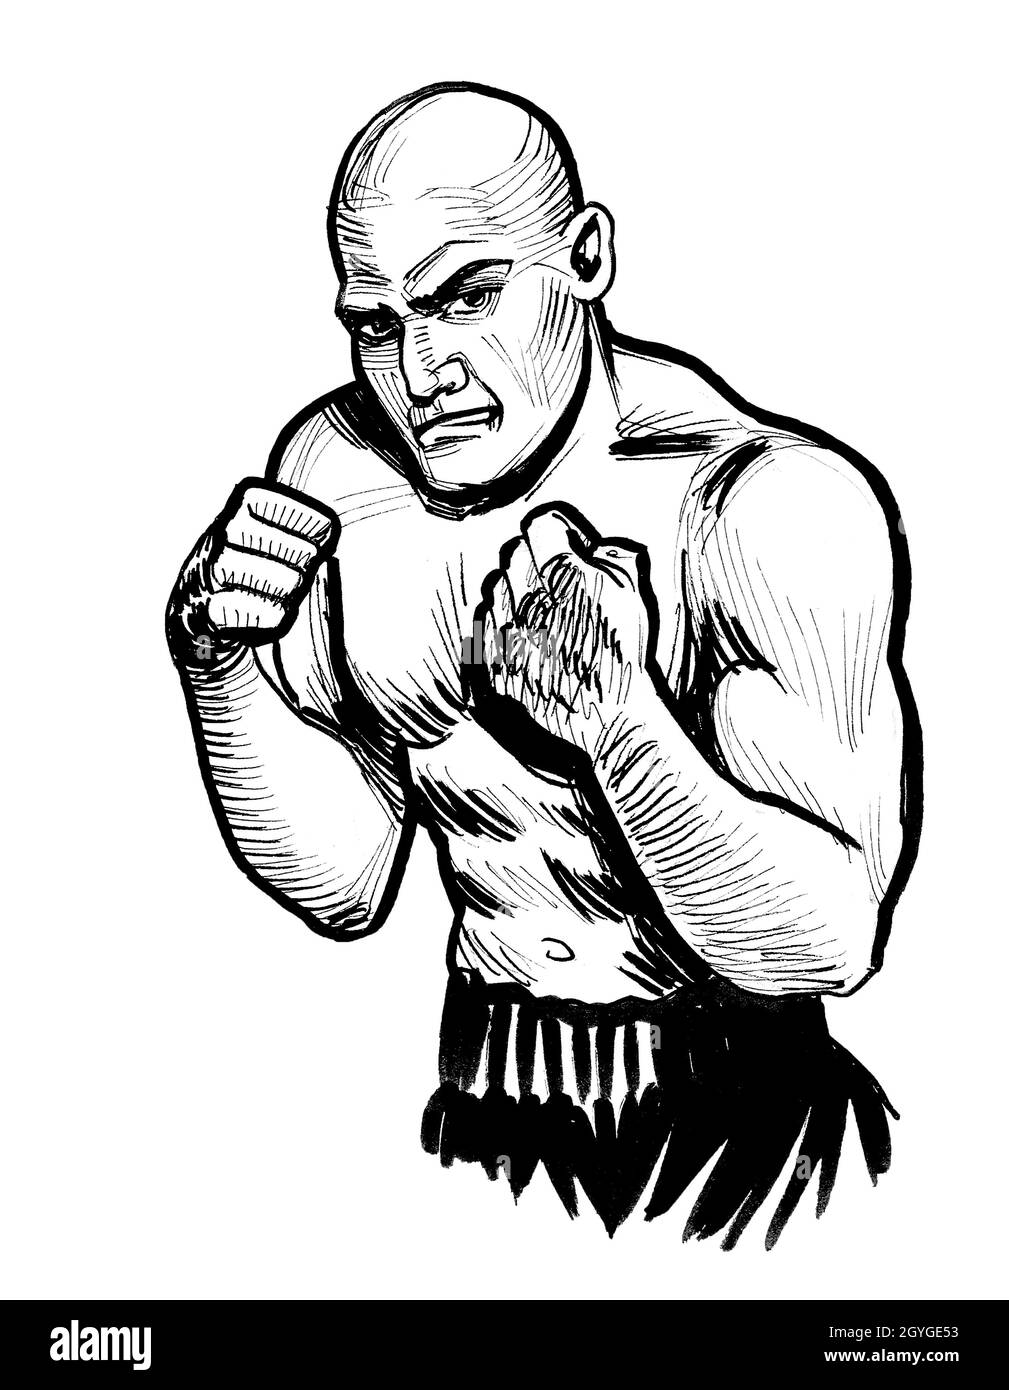 Premium Vector  Boxing champ standing and ready to fight  man boxer  fighter silhouette hand drawn vector sketch